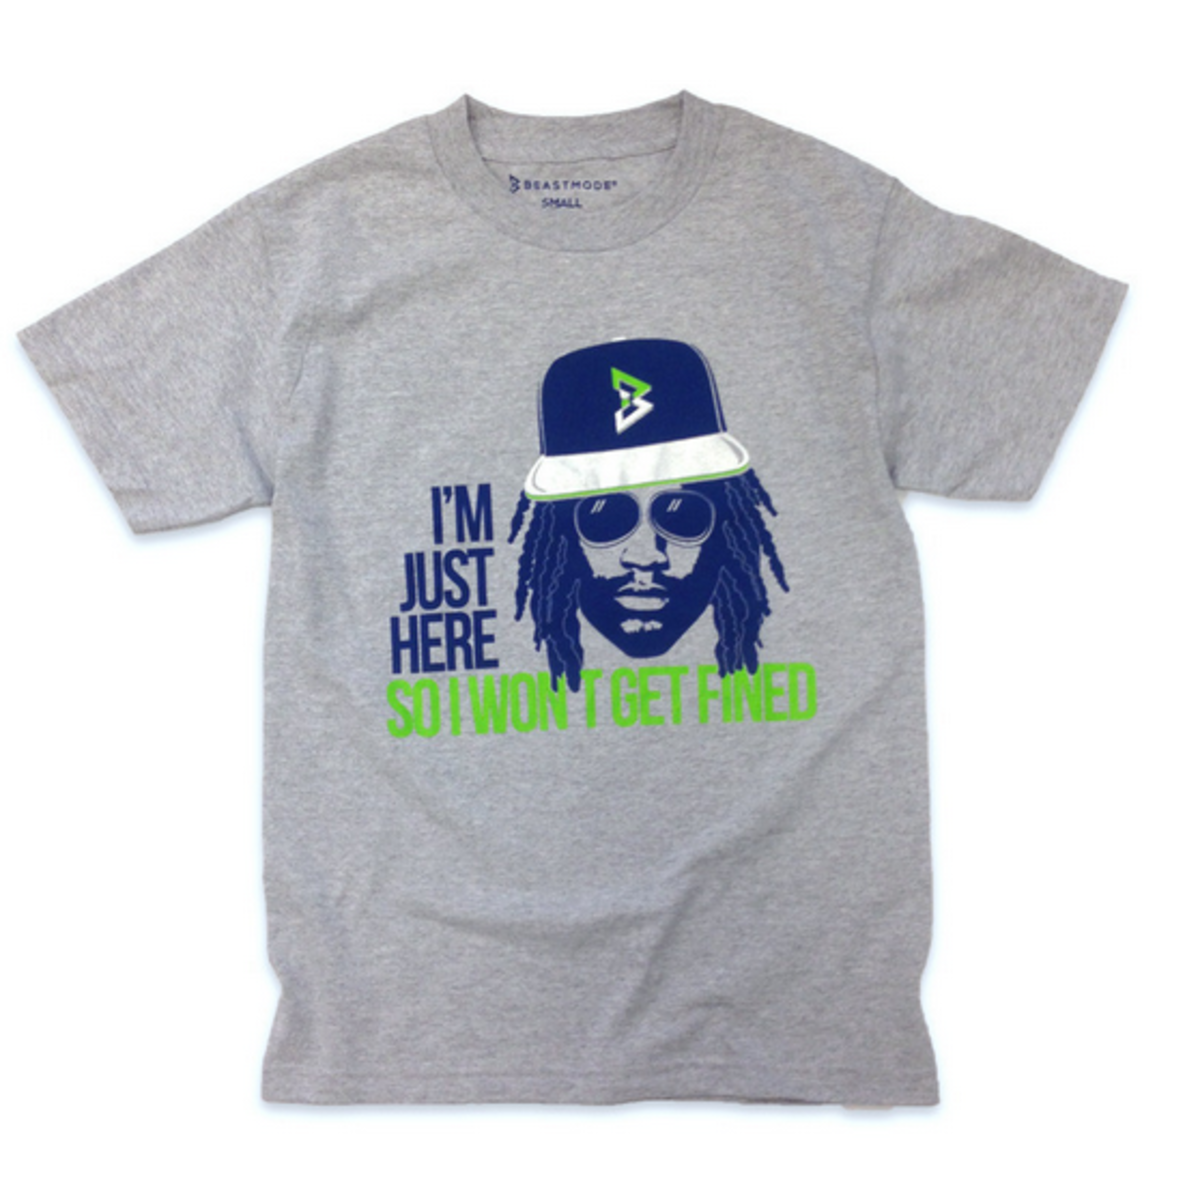 seahawks_marshawn_lynch_shirt_wont_get_fined.png